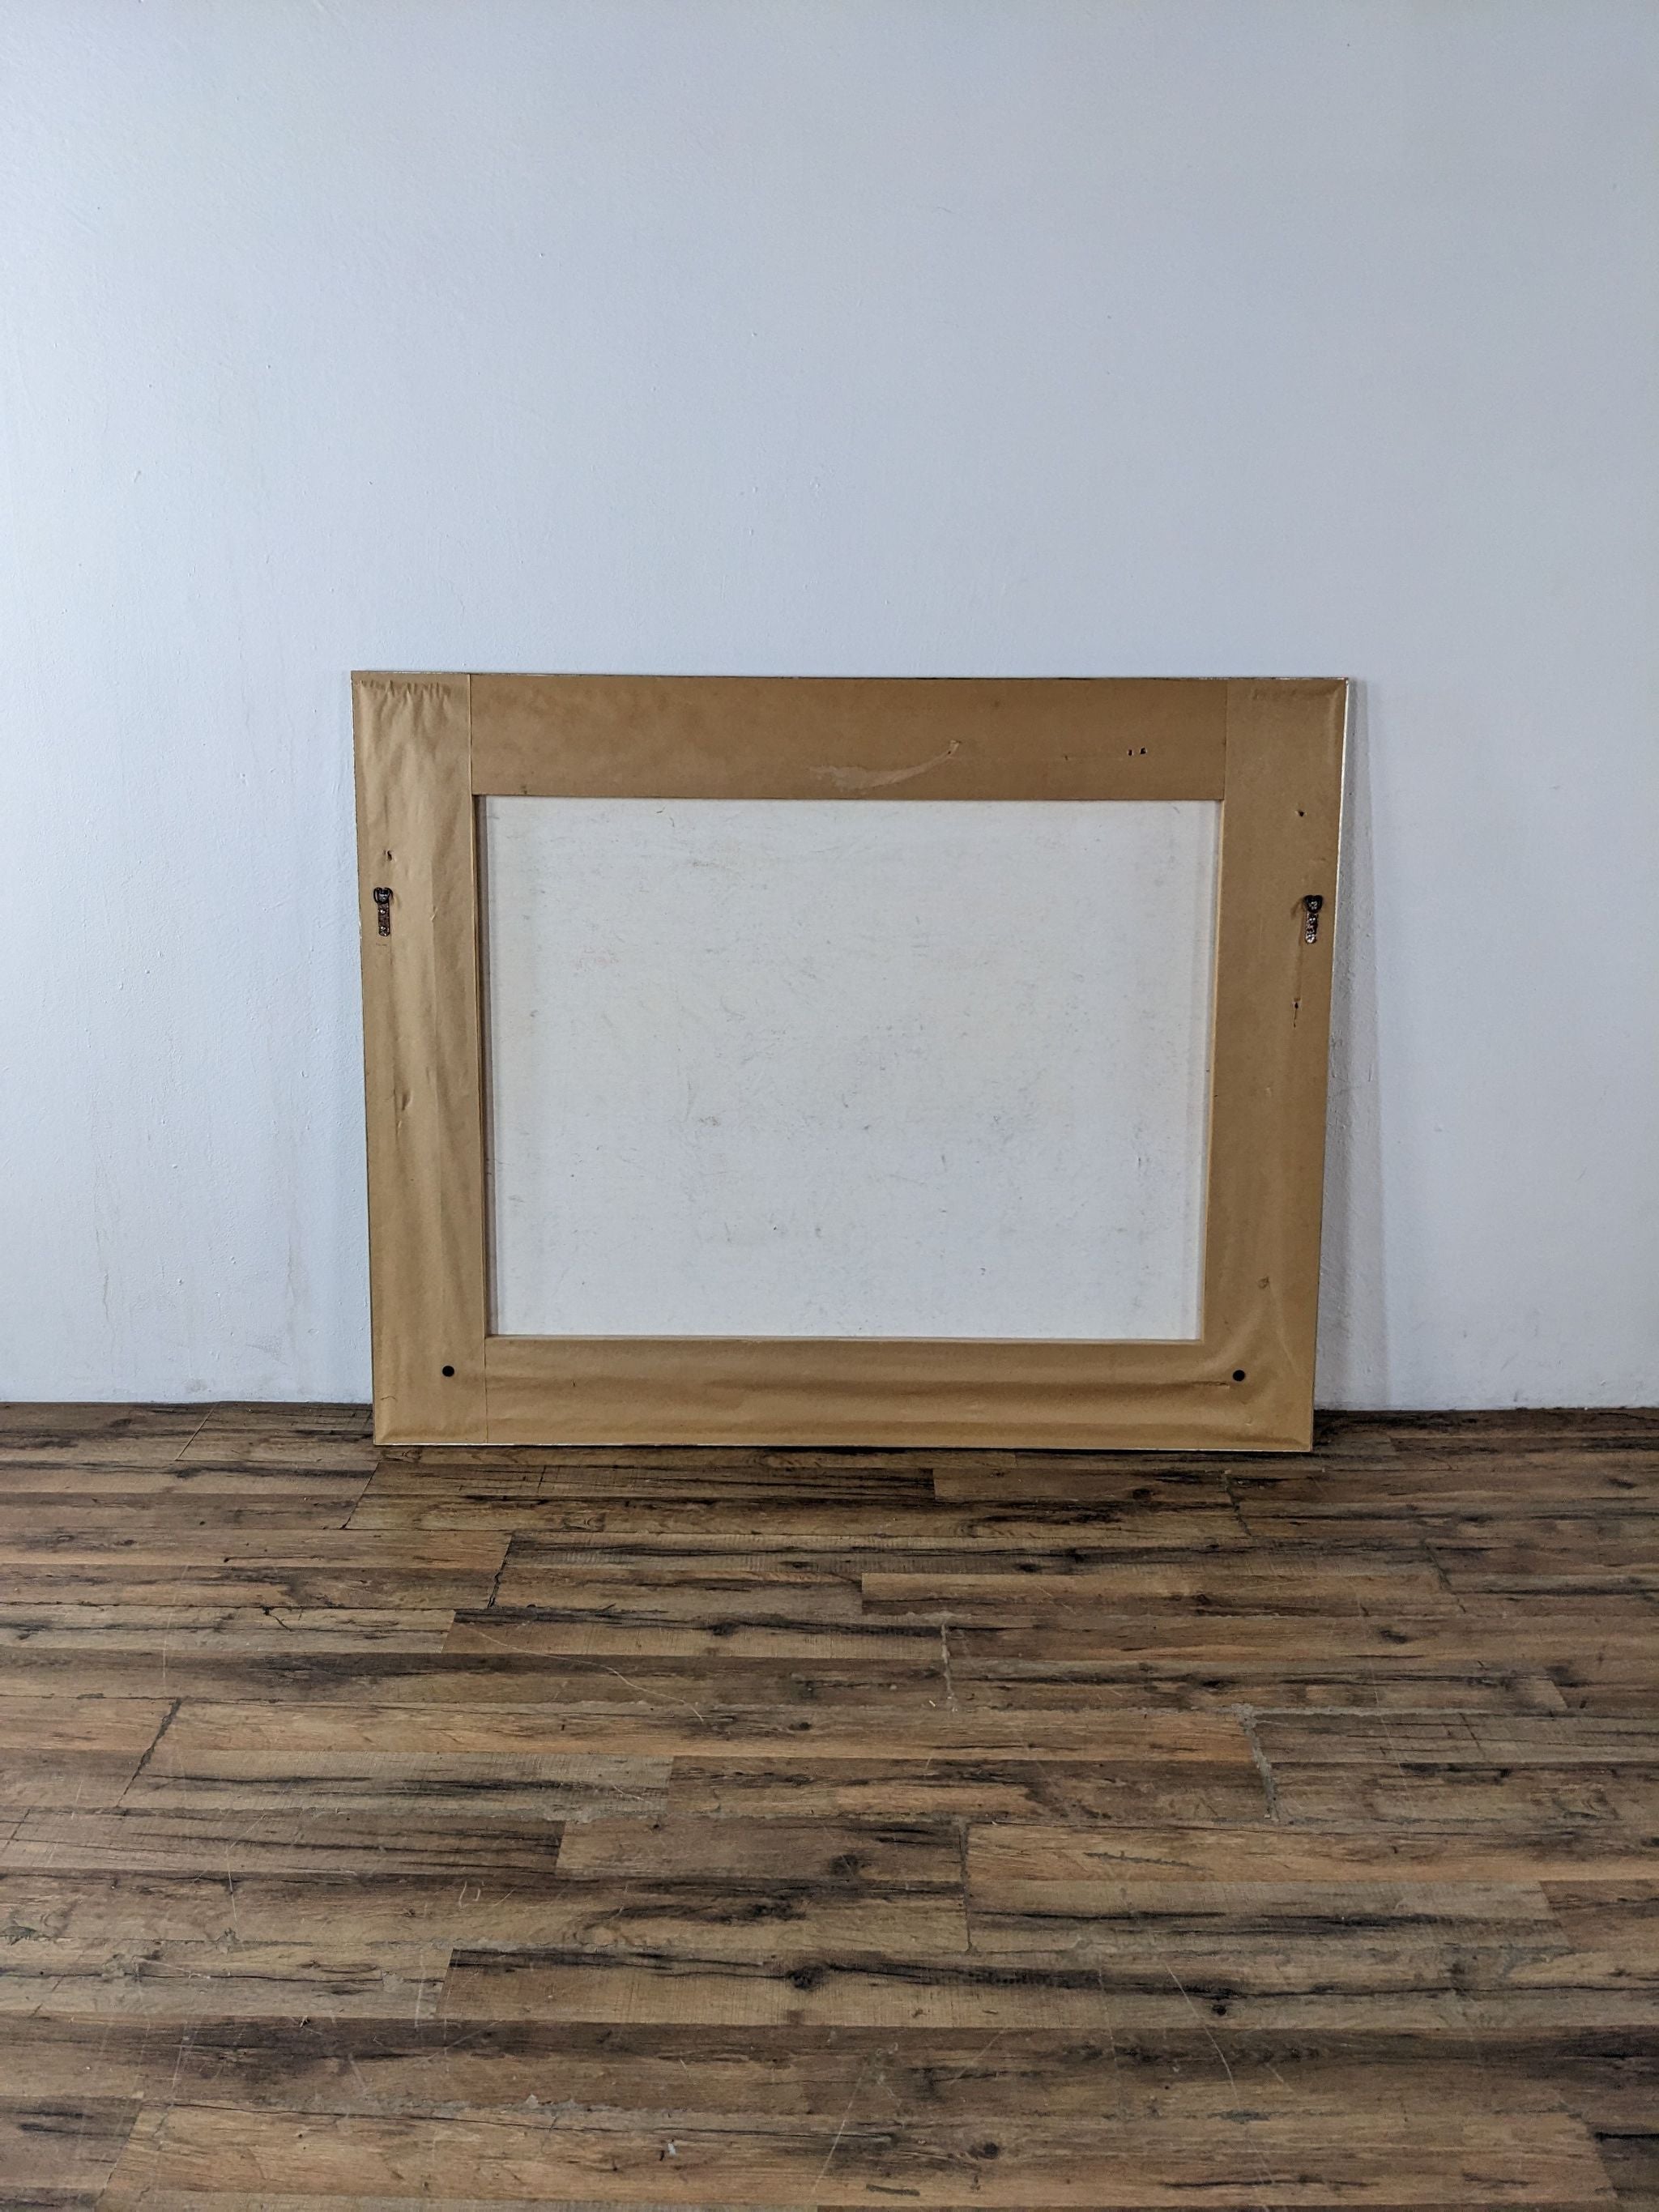 Back view of a canvas on a wooden floor against a white wall, signed by artist Douglas, from Reperch brand.